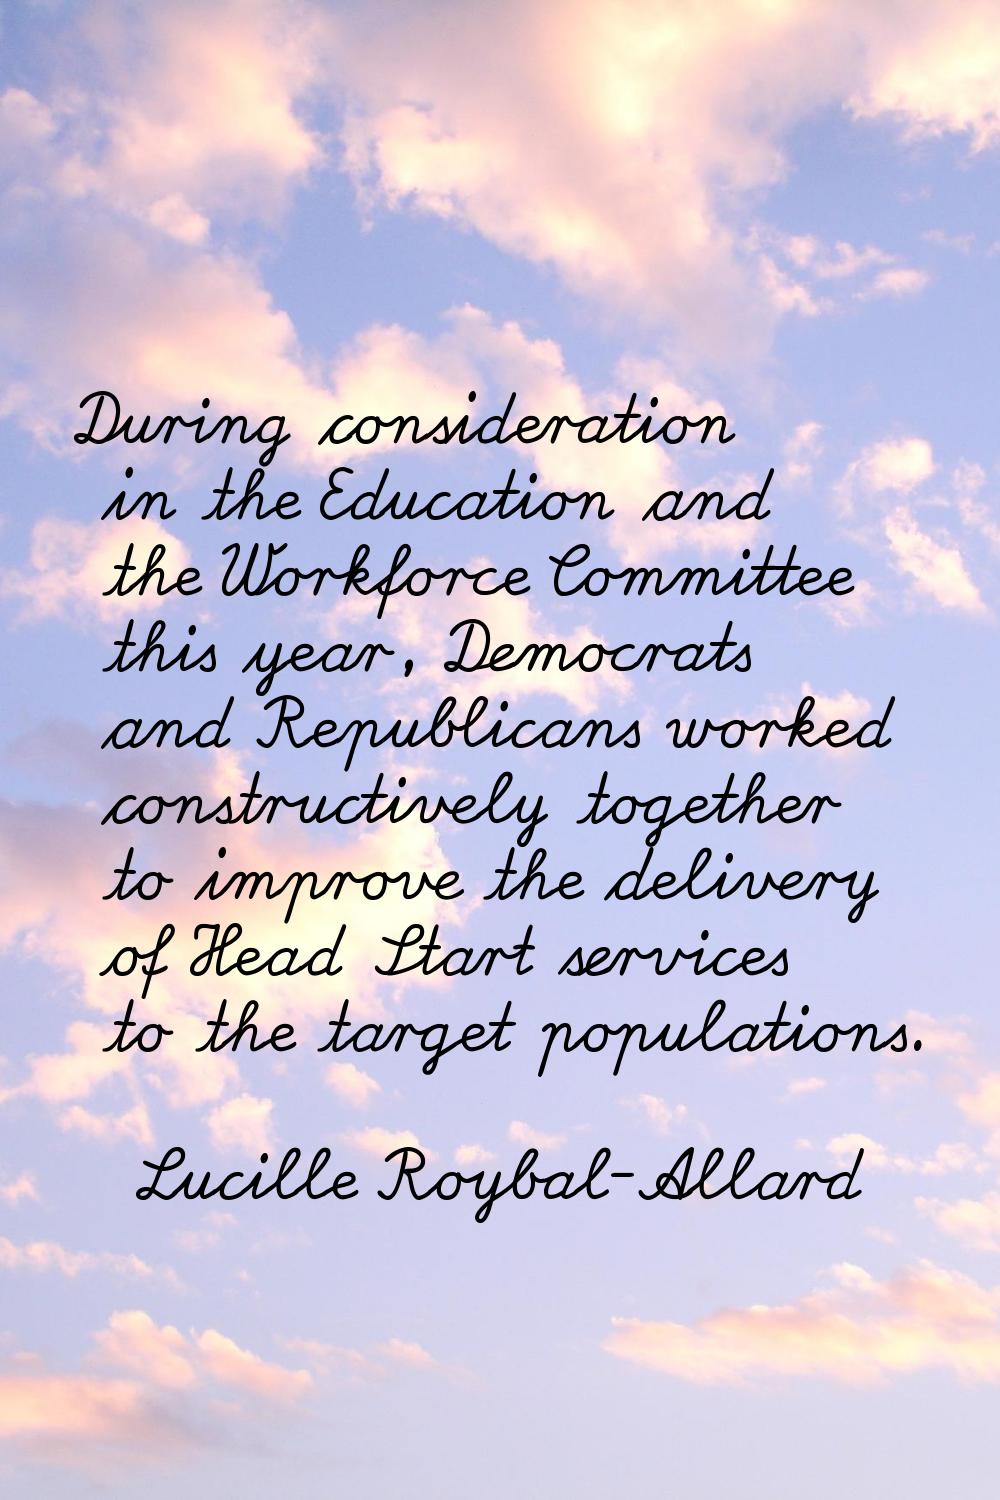 During consideration in the Education and the Workforce Committee this year, Democrats and Republic